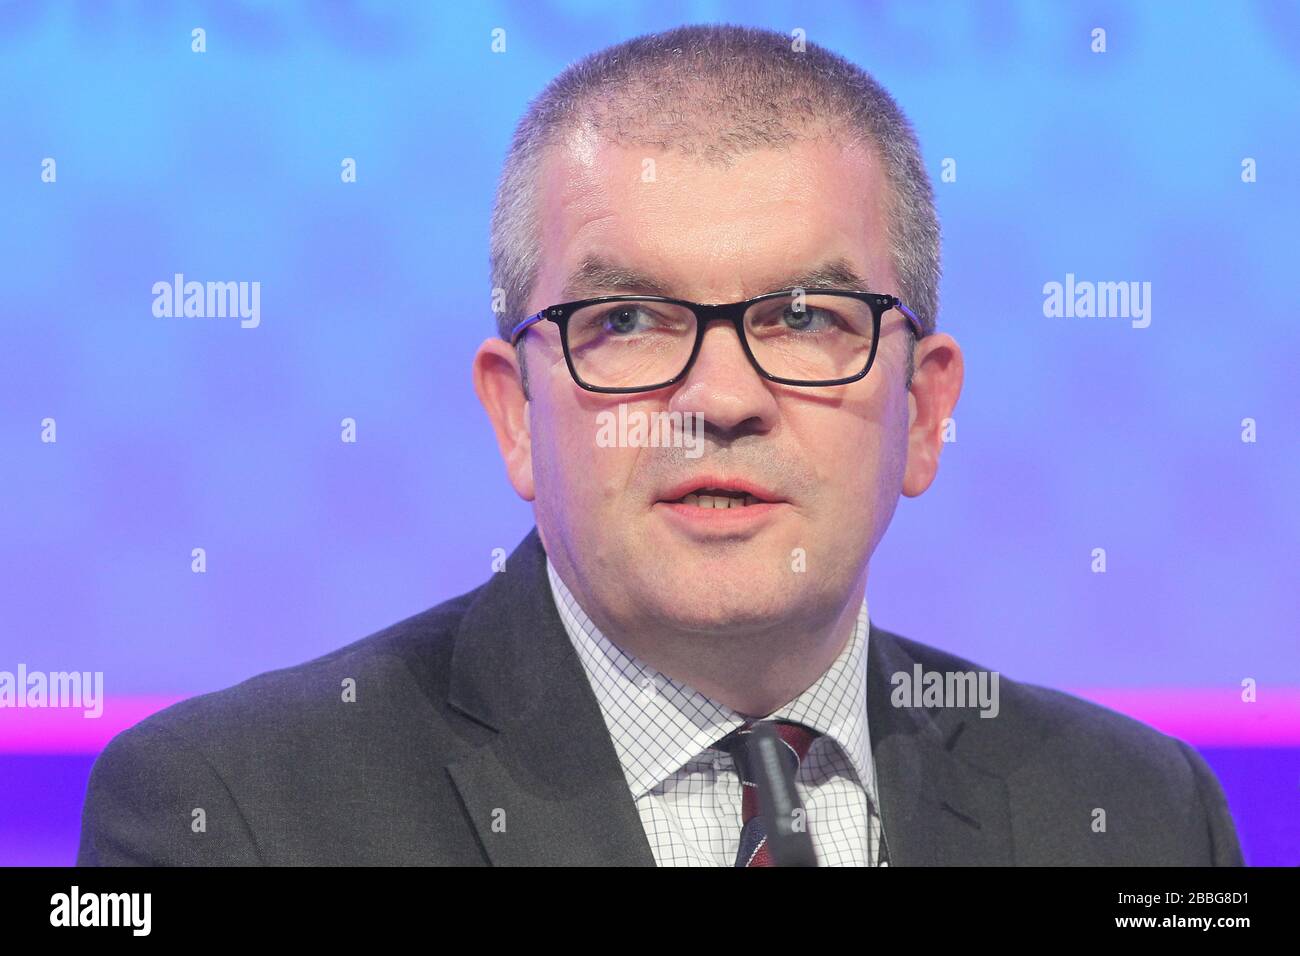 Martin Hewitt is Chair of the National Police Chiefs' Council and was speaking at their conference in February 2020. Stock Photo